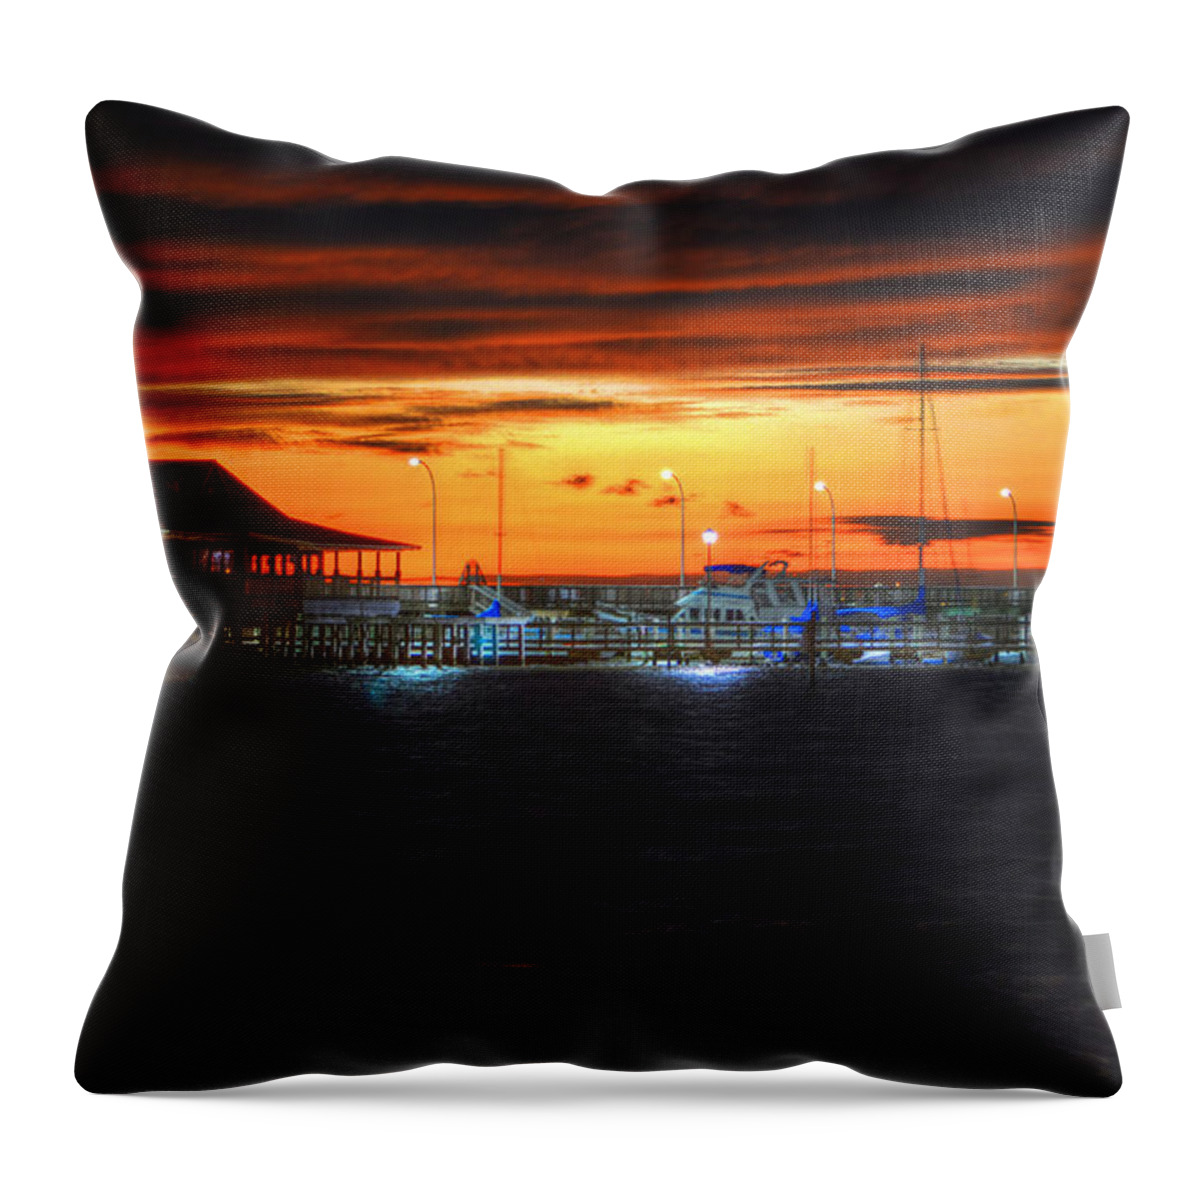 Palm Throw Pillow featuring the digital art Sunset at the Fairhope Pier by Michael Thomas